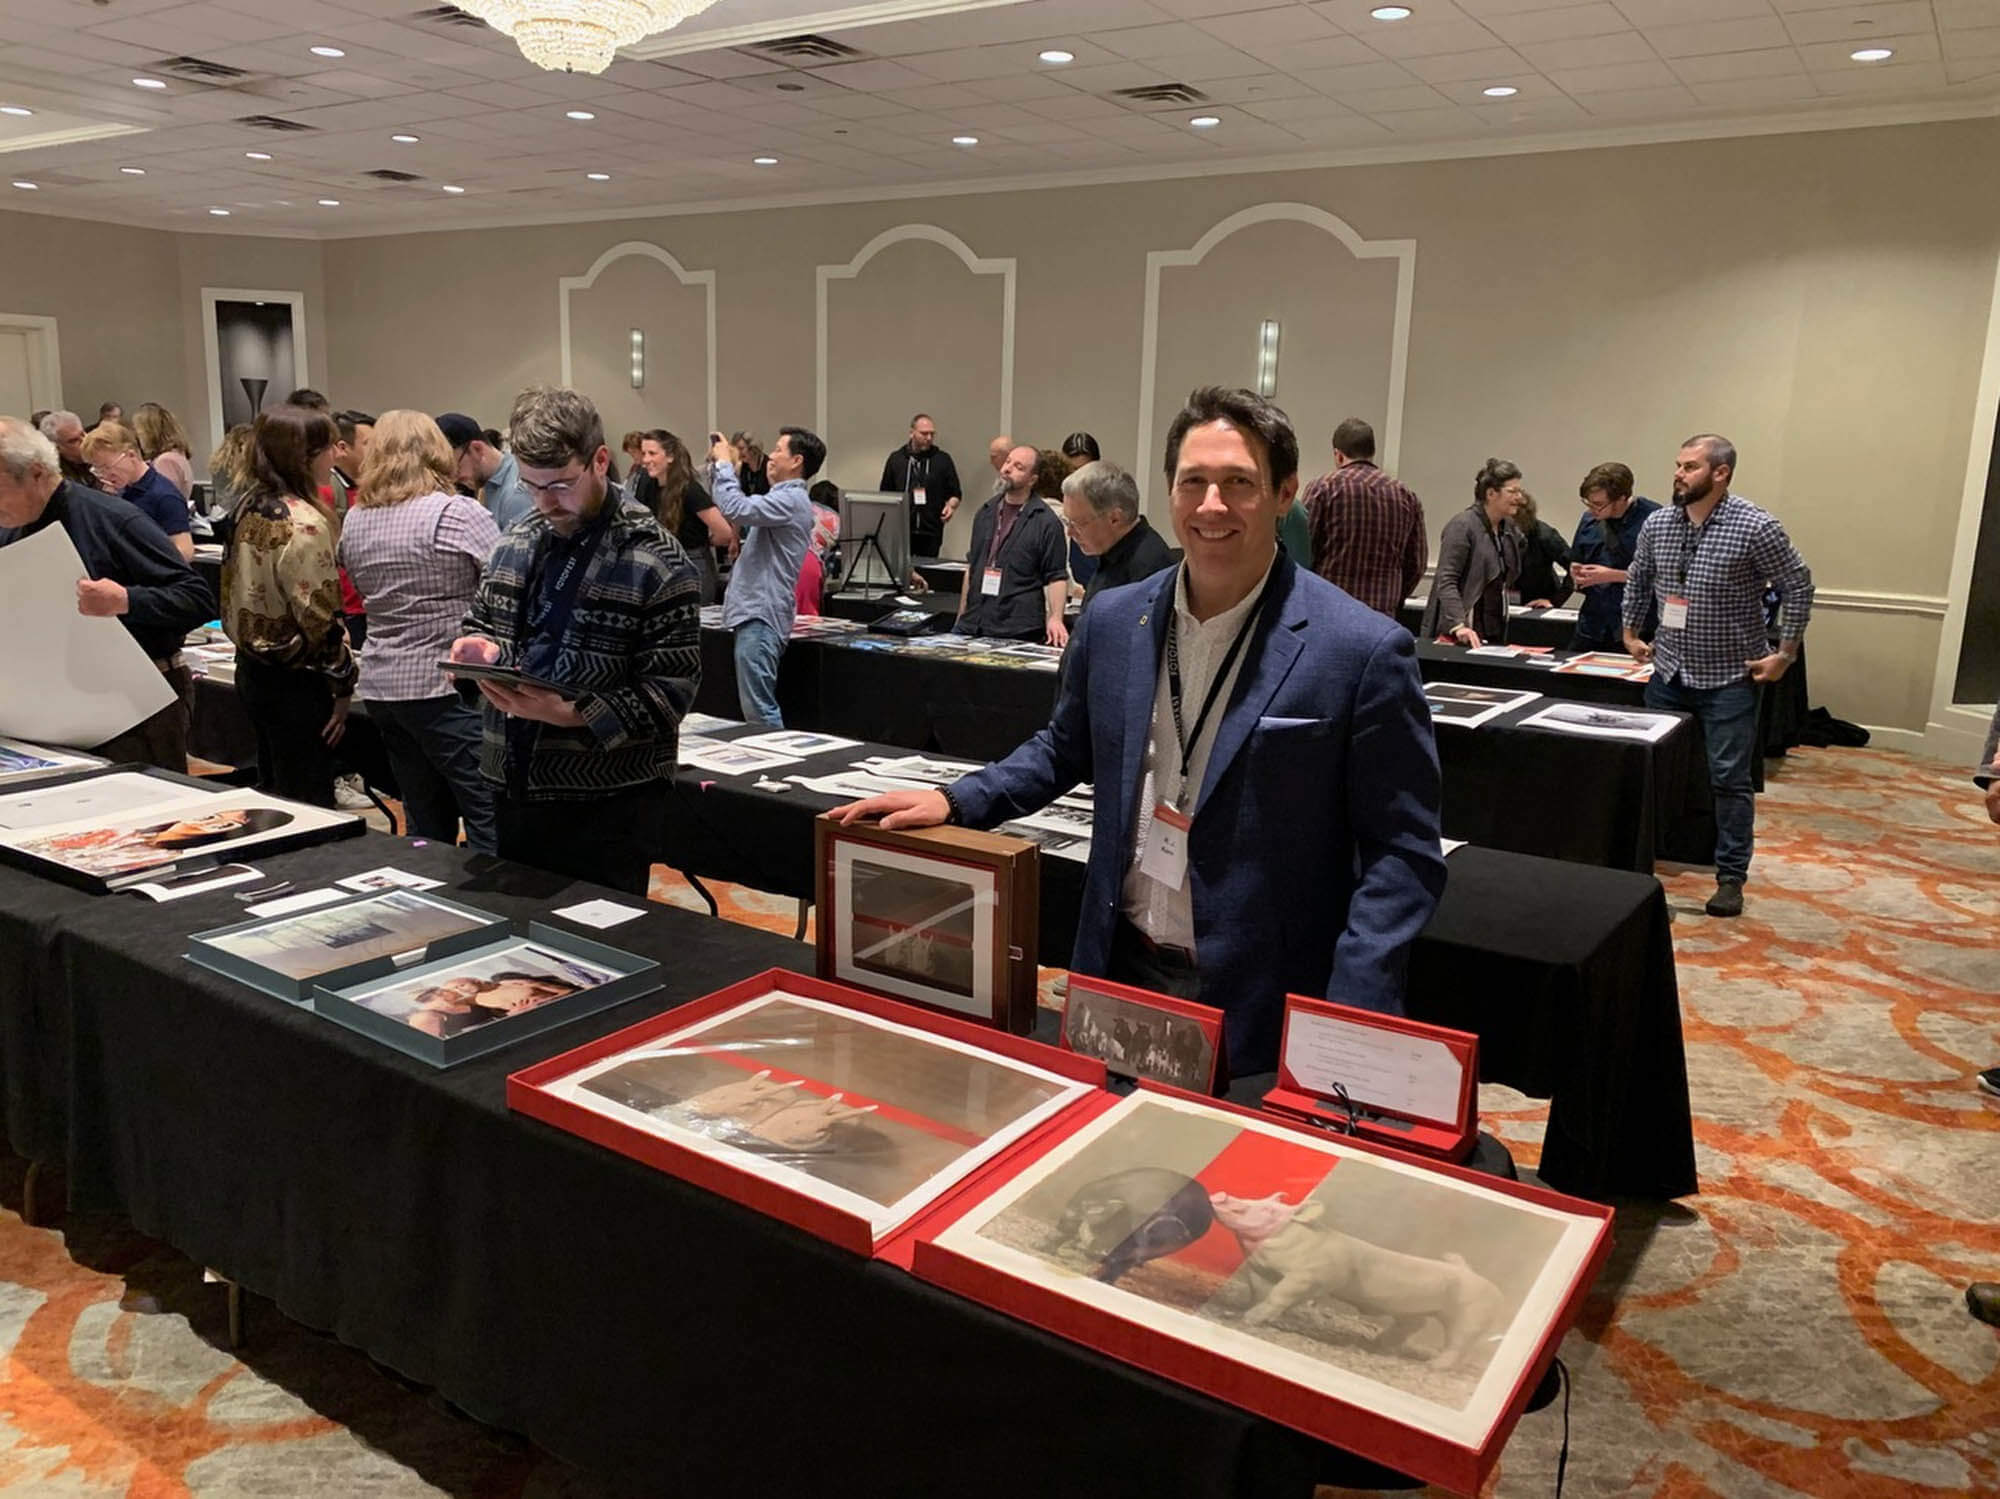 Houston FotoFest 2020 with R. J. Kern’s project, “The Best of the Best"